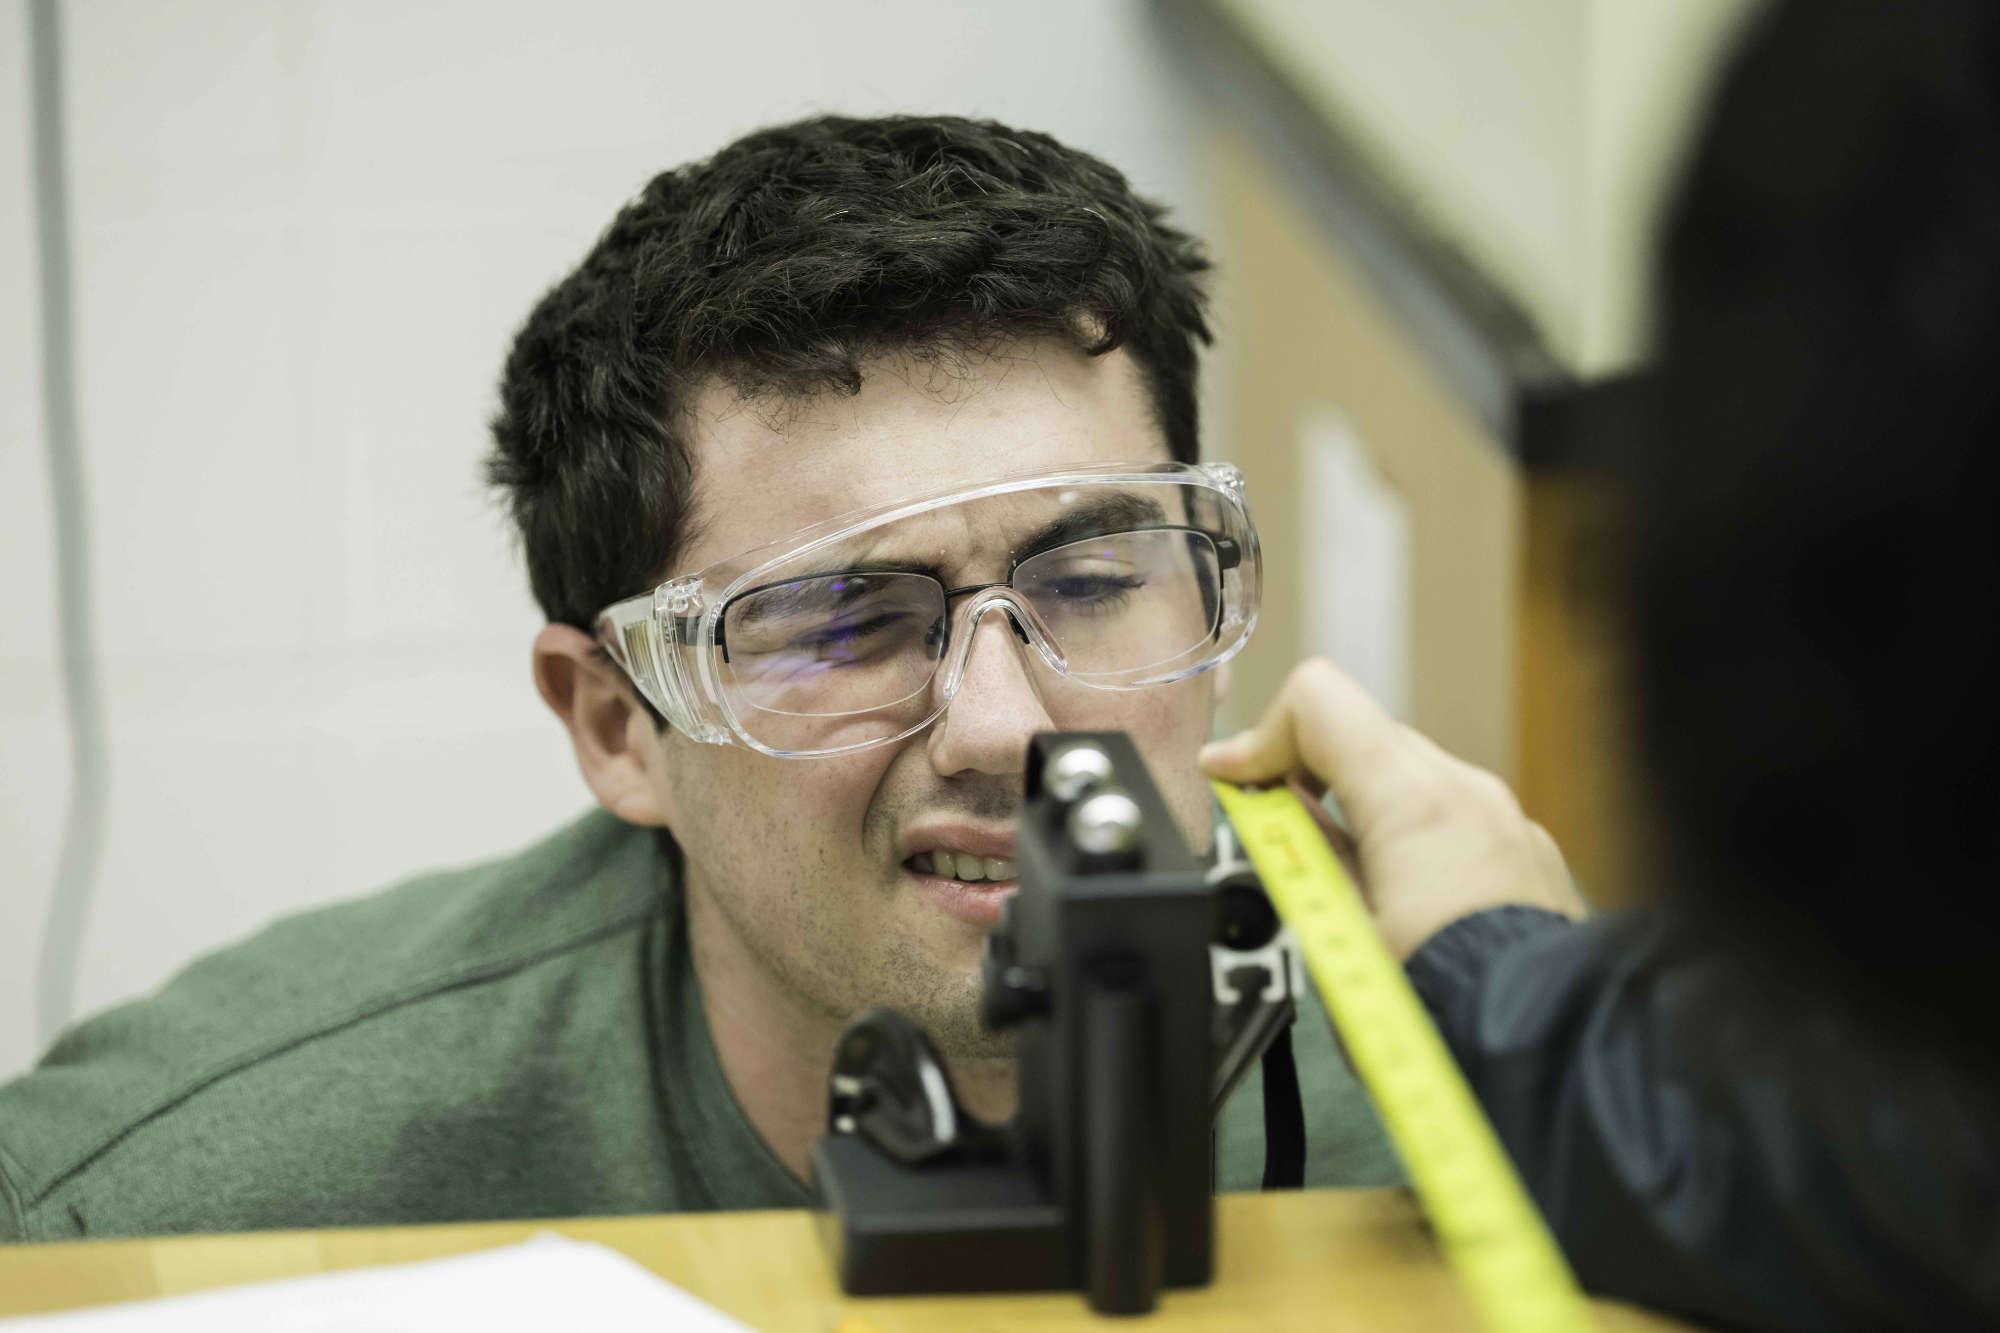 Mechanical 工程师ing student in safety goggles stares intently at equipment while a hand nearby holds measuring tape.